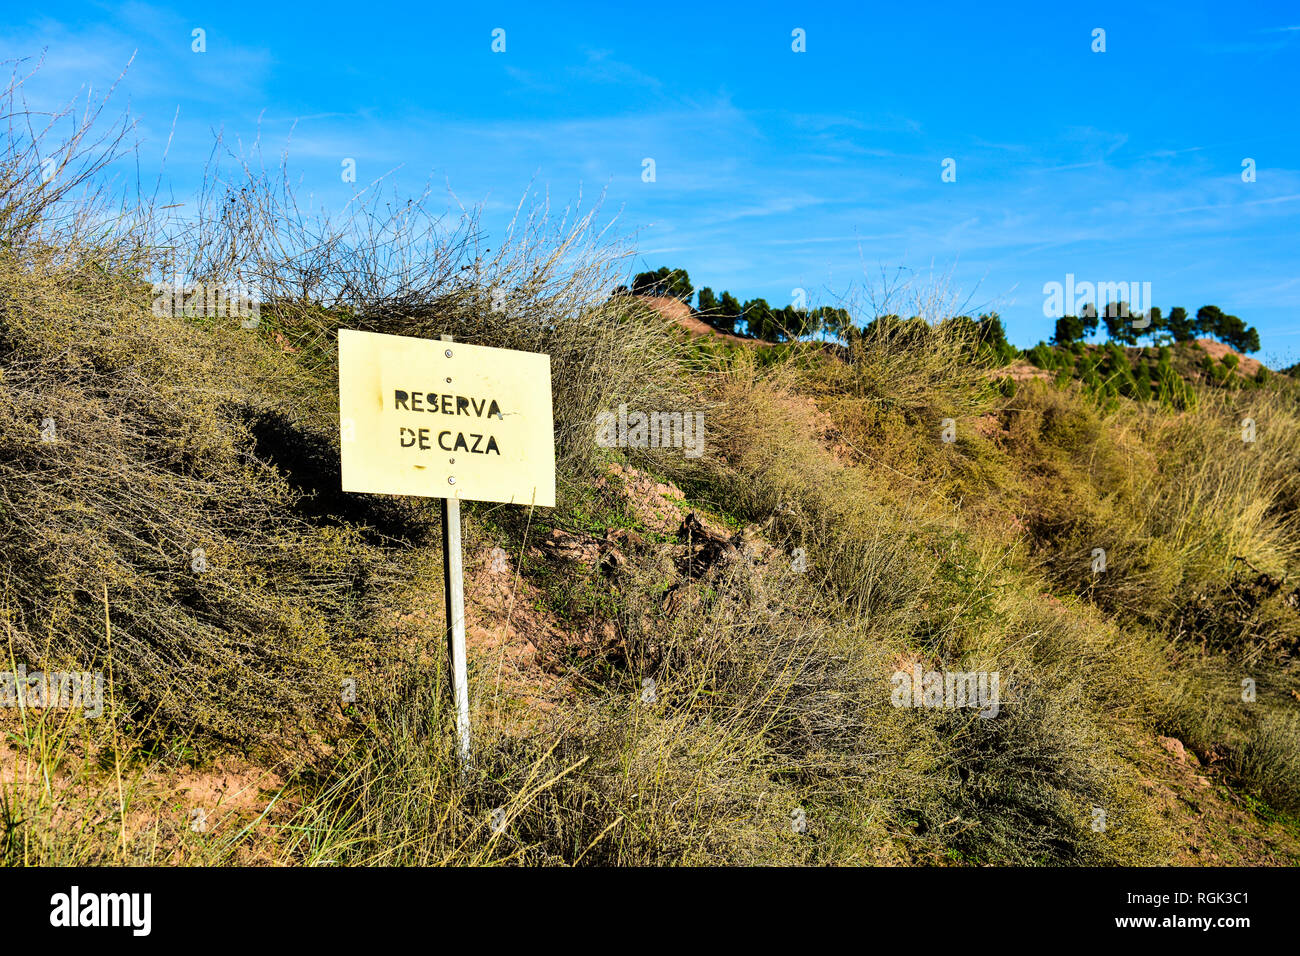 Hunting reserve signal in Spain. Sunny day. Leaky and rusty metal plate. Scrub and bushes Stock Photo